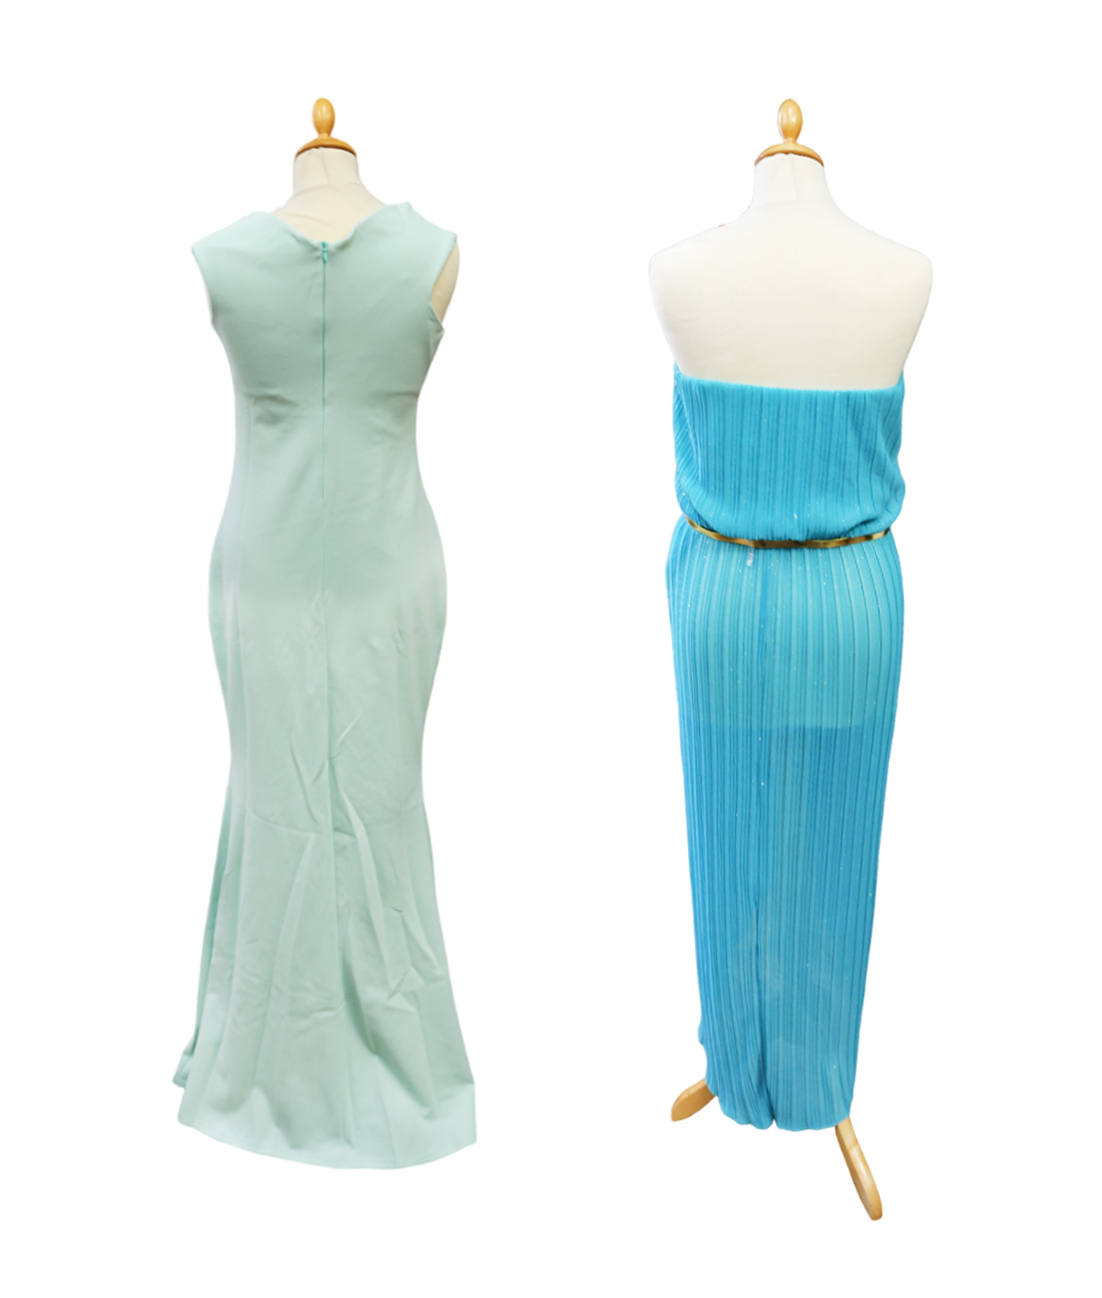 6 Goddiva mint green dresses, brand new with tags, 1 x size 8, 2 x size 10, 2 x size 12 and 1 x size - Image 2 of 6